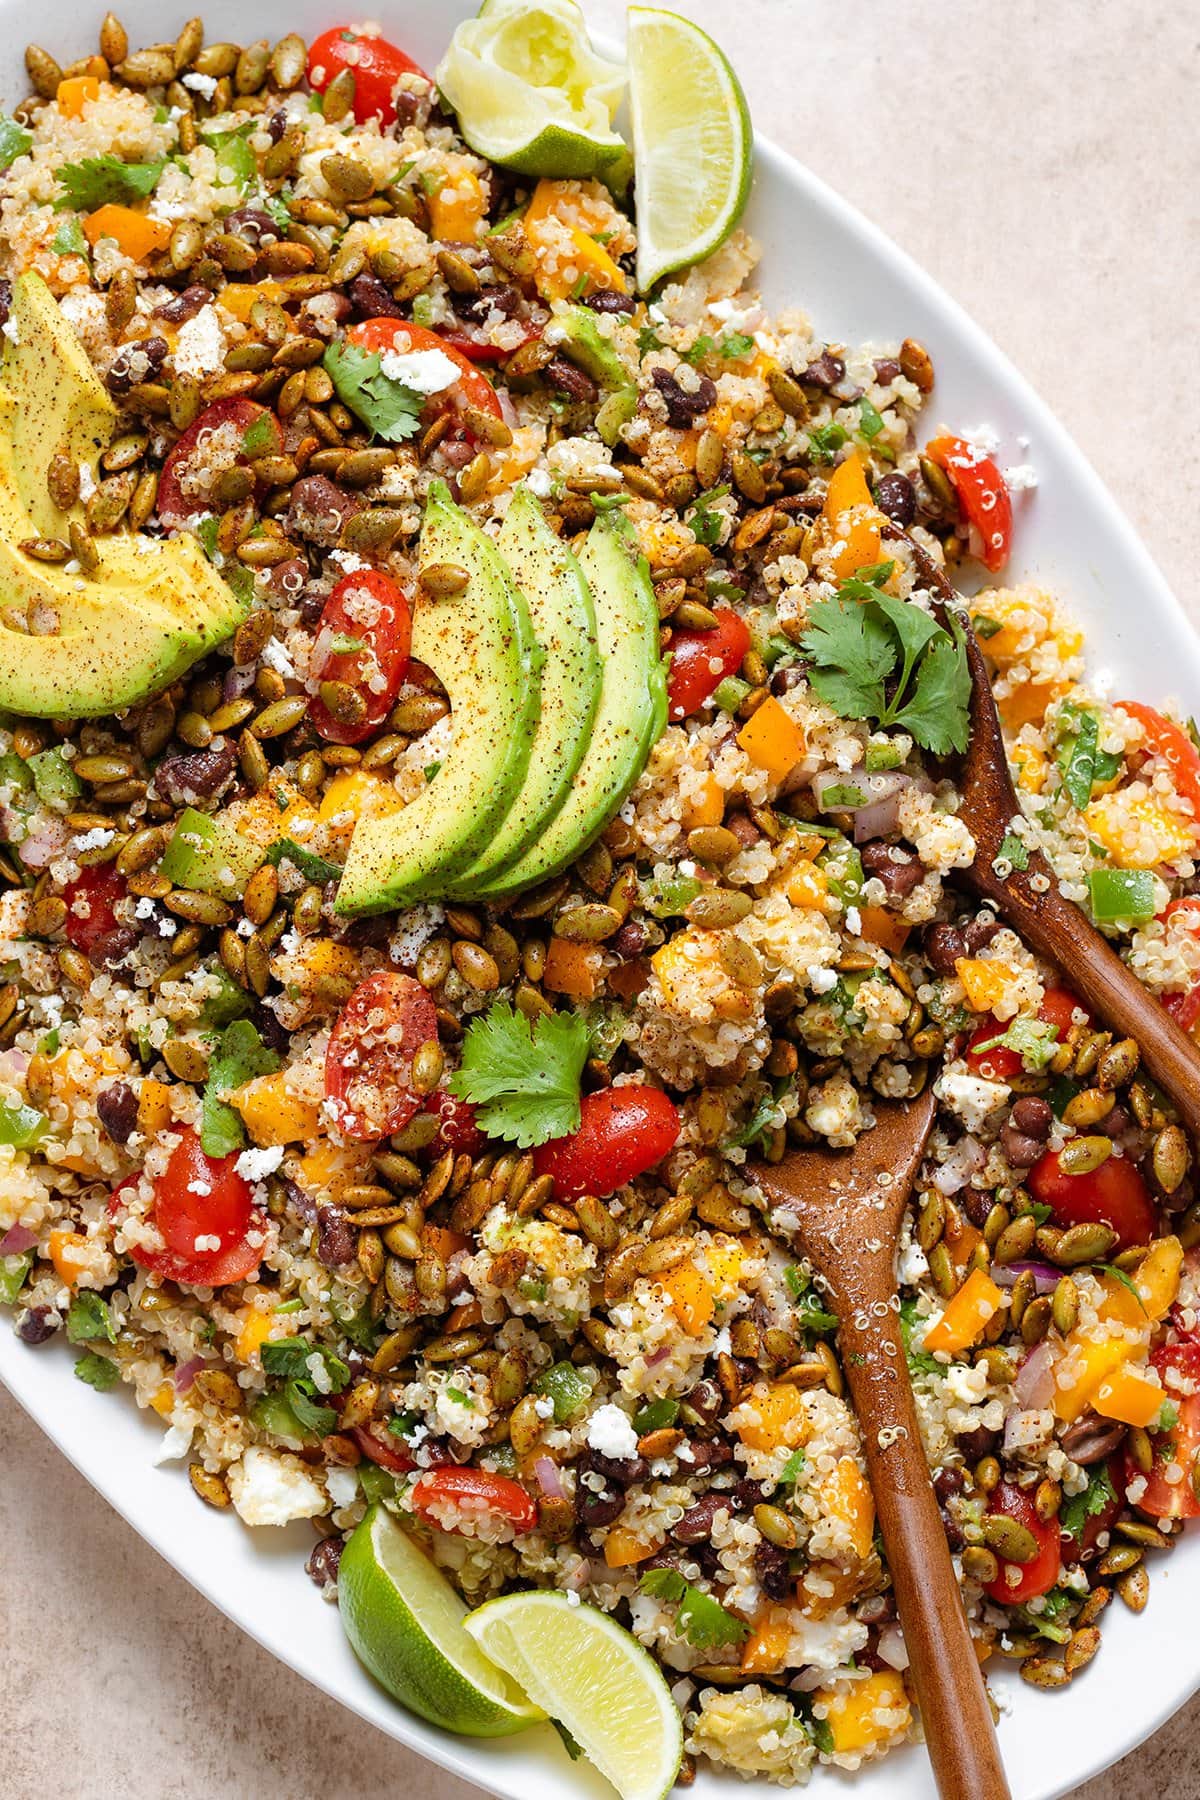 Mango quinoa salad topped with avocado slices on a large serving plate with wooden serving spoons on the right side.